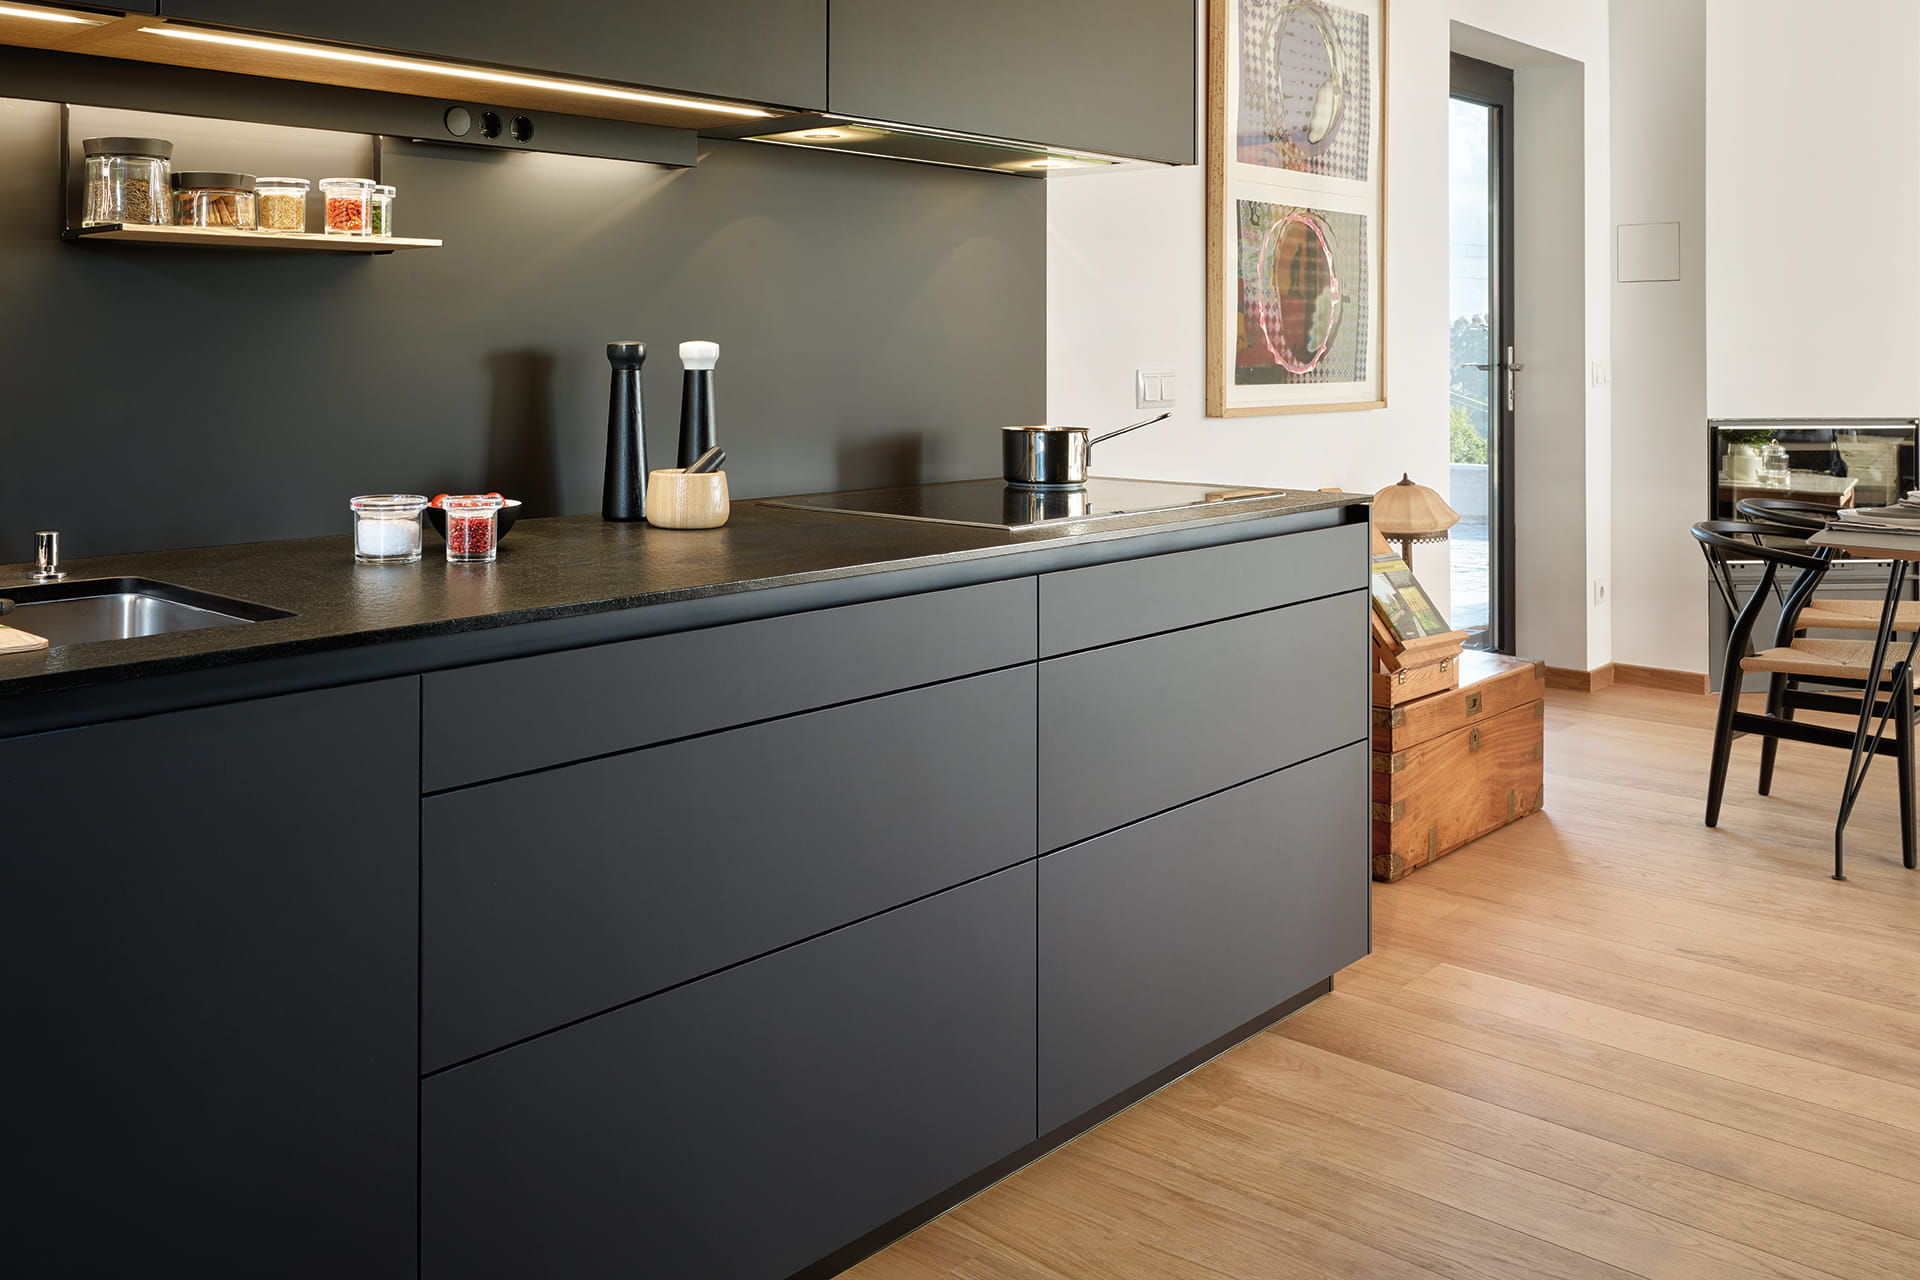 Santos kitchen furniture: large-capacity drawers and double drawers